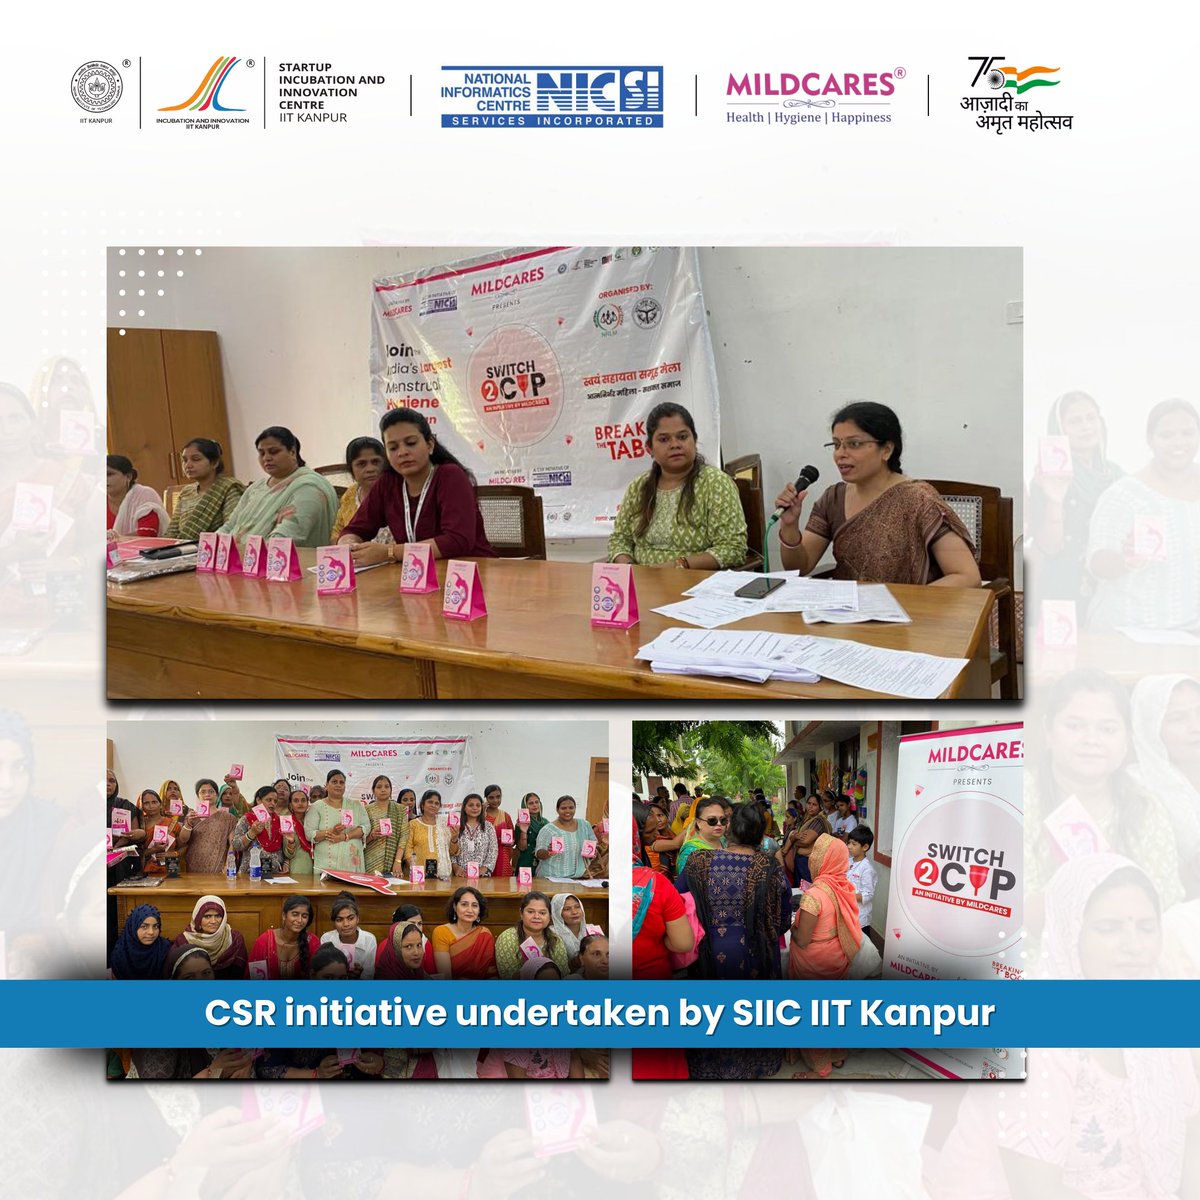 1/5
CSR initiative undertaken by SIIC:

SIIC incubated startup, @mildcares , has launched its 'Switch2Cup' Campaign - a mission to raise awareness and ensure equitable access to menstrual necessities for Indian women.

Menstrual health is an often overlooked obstacle in the